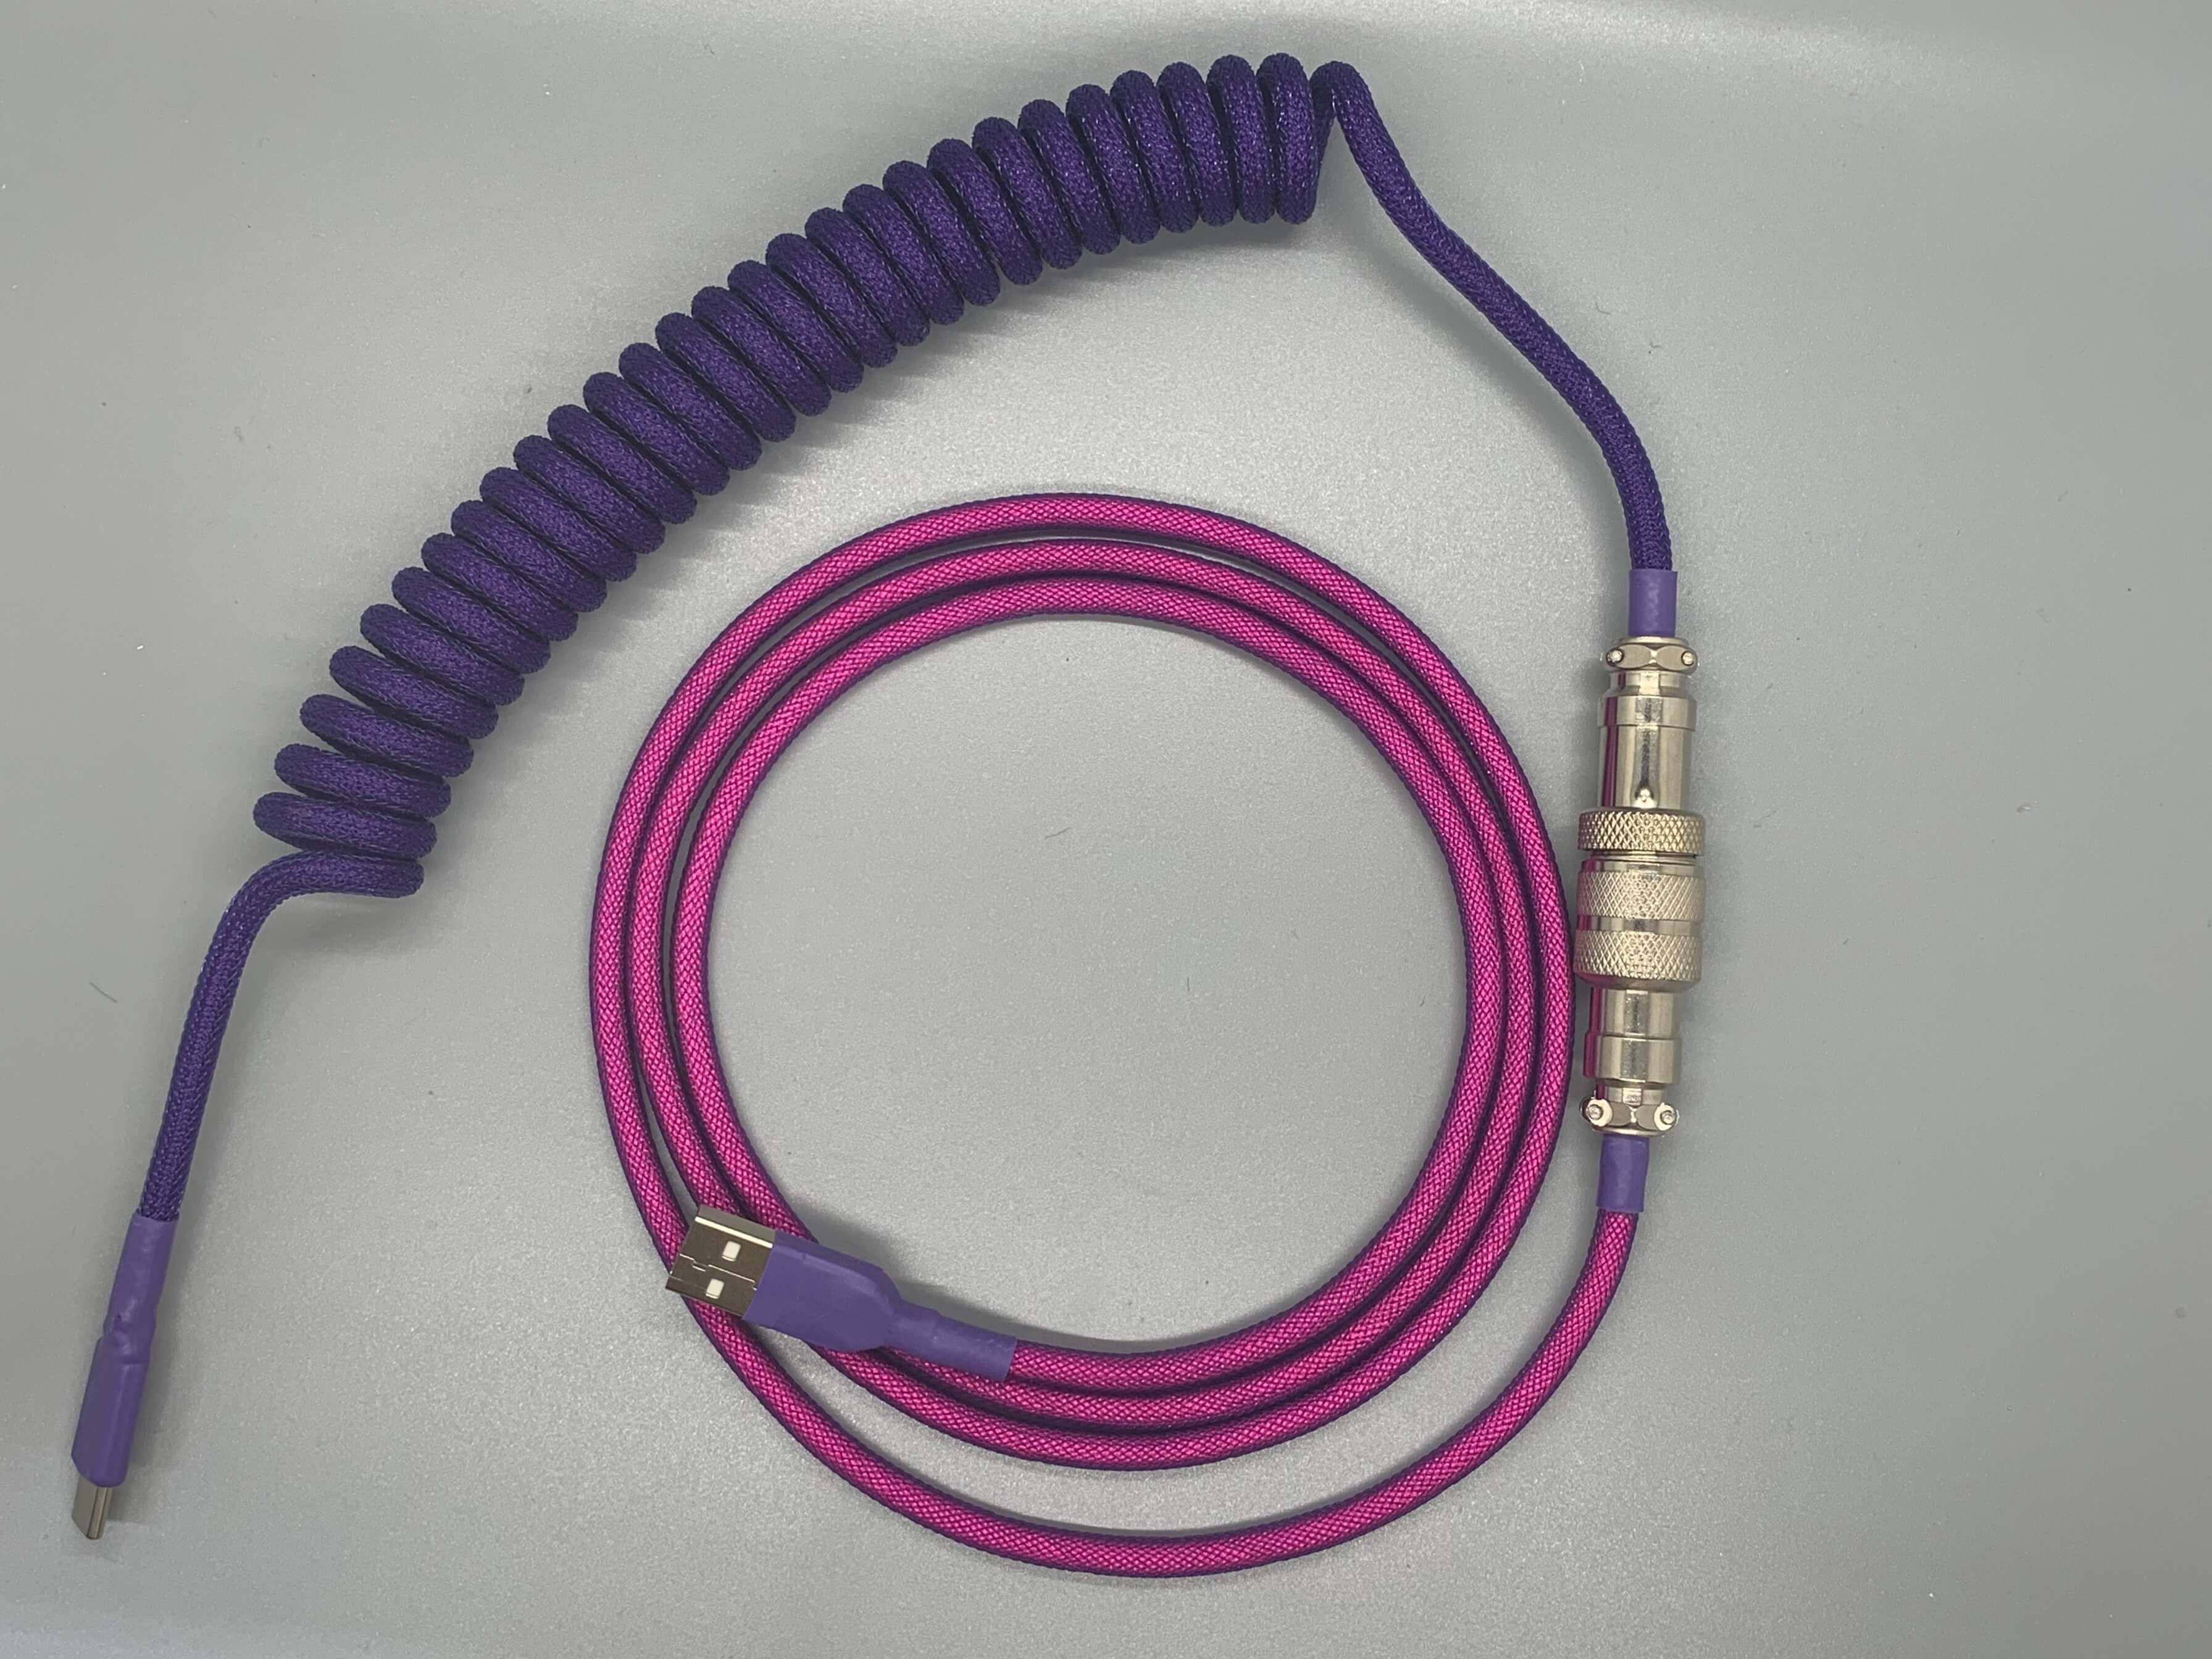 Design-Your-Own USB Cable! – Space Cables